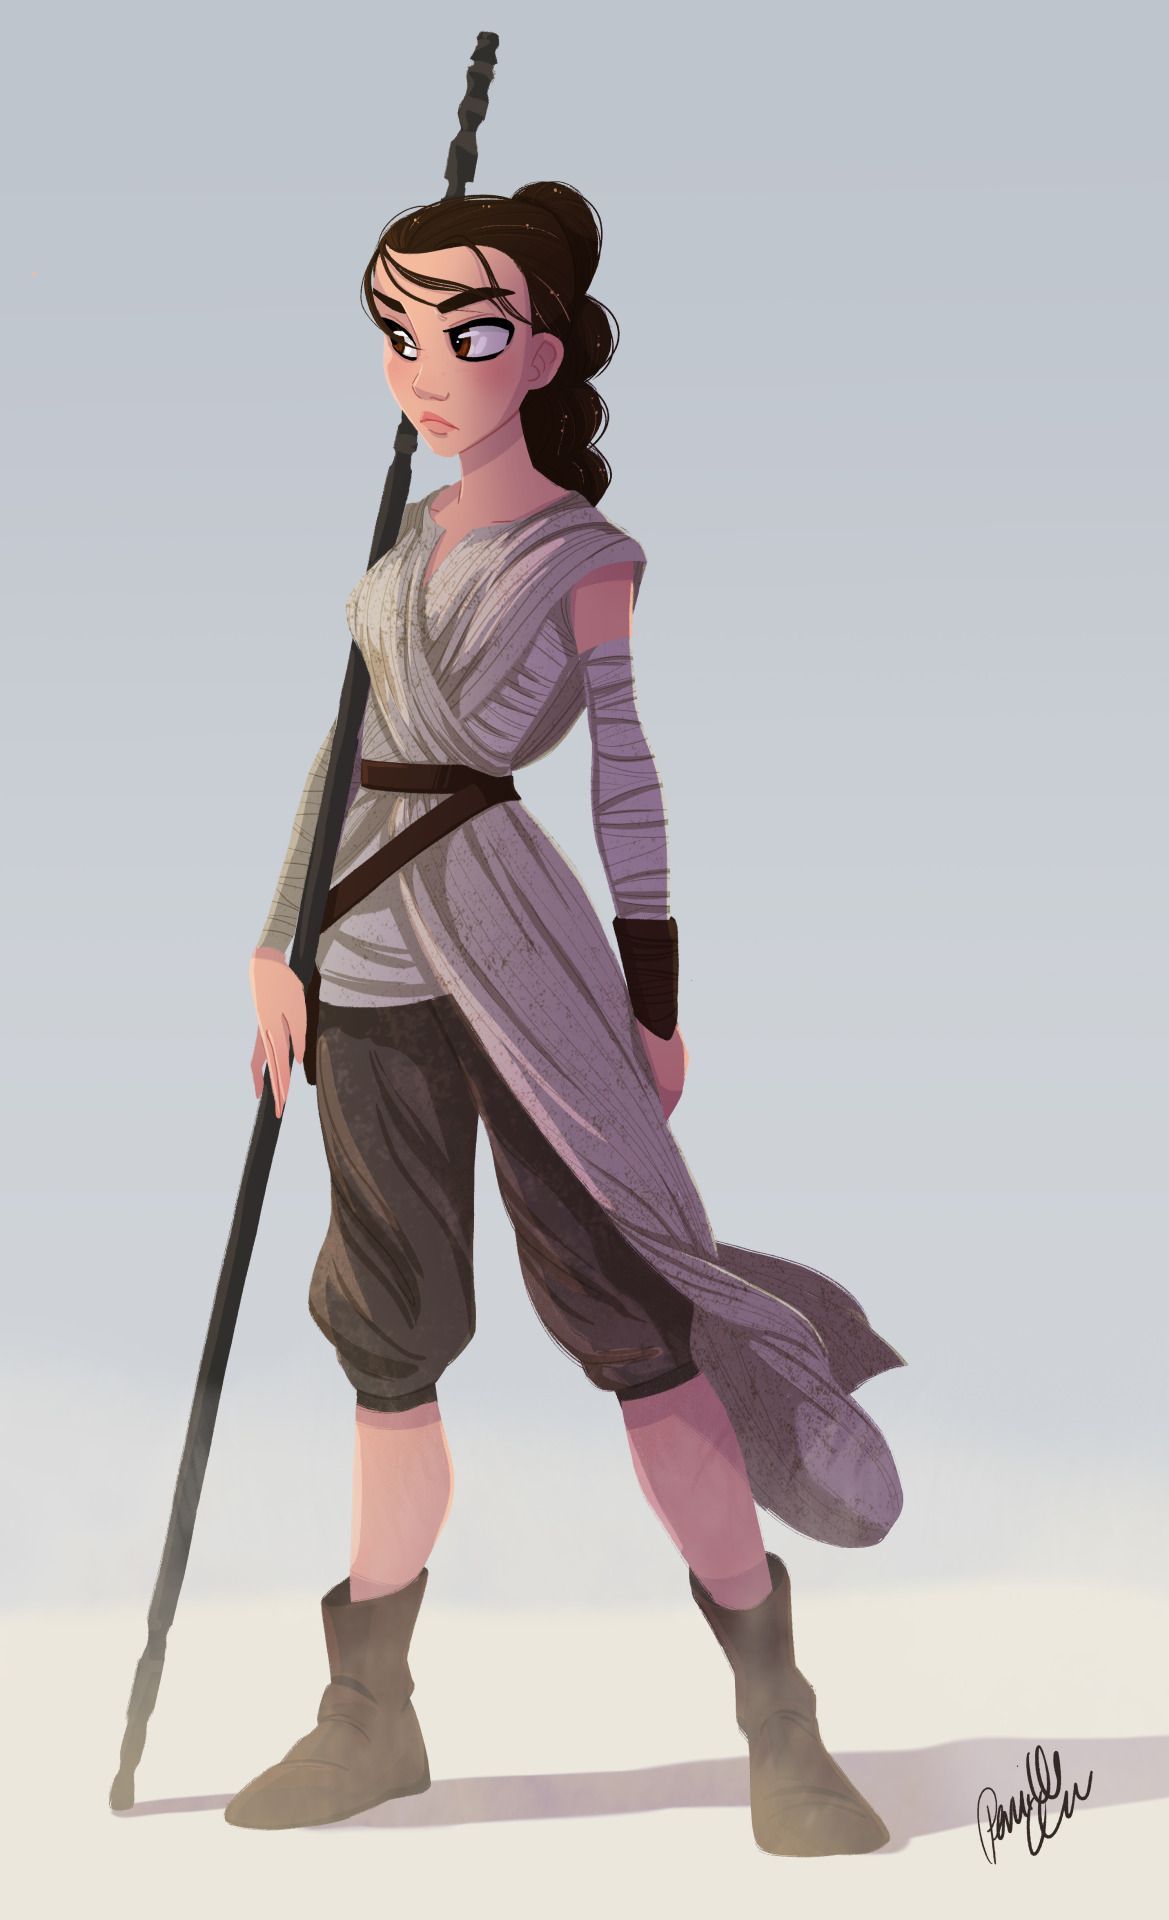 Im very excited to see the new Star Wars. So heres a very early fan piece of Rey